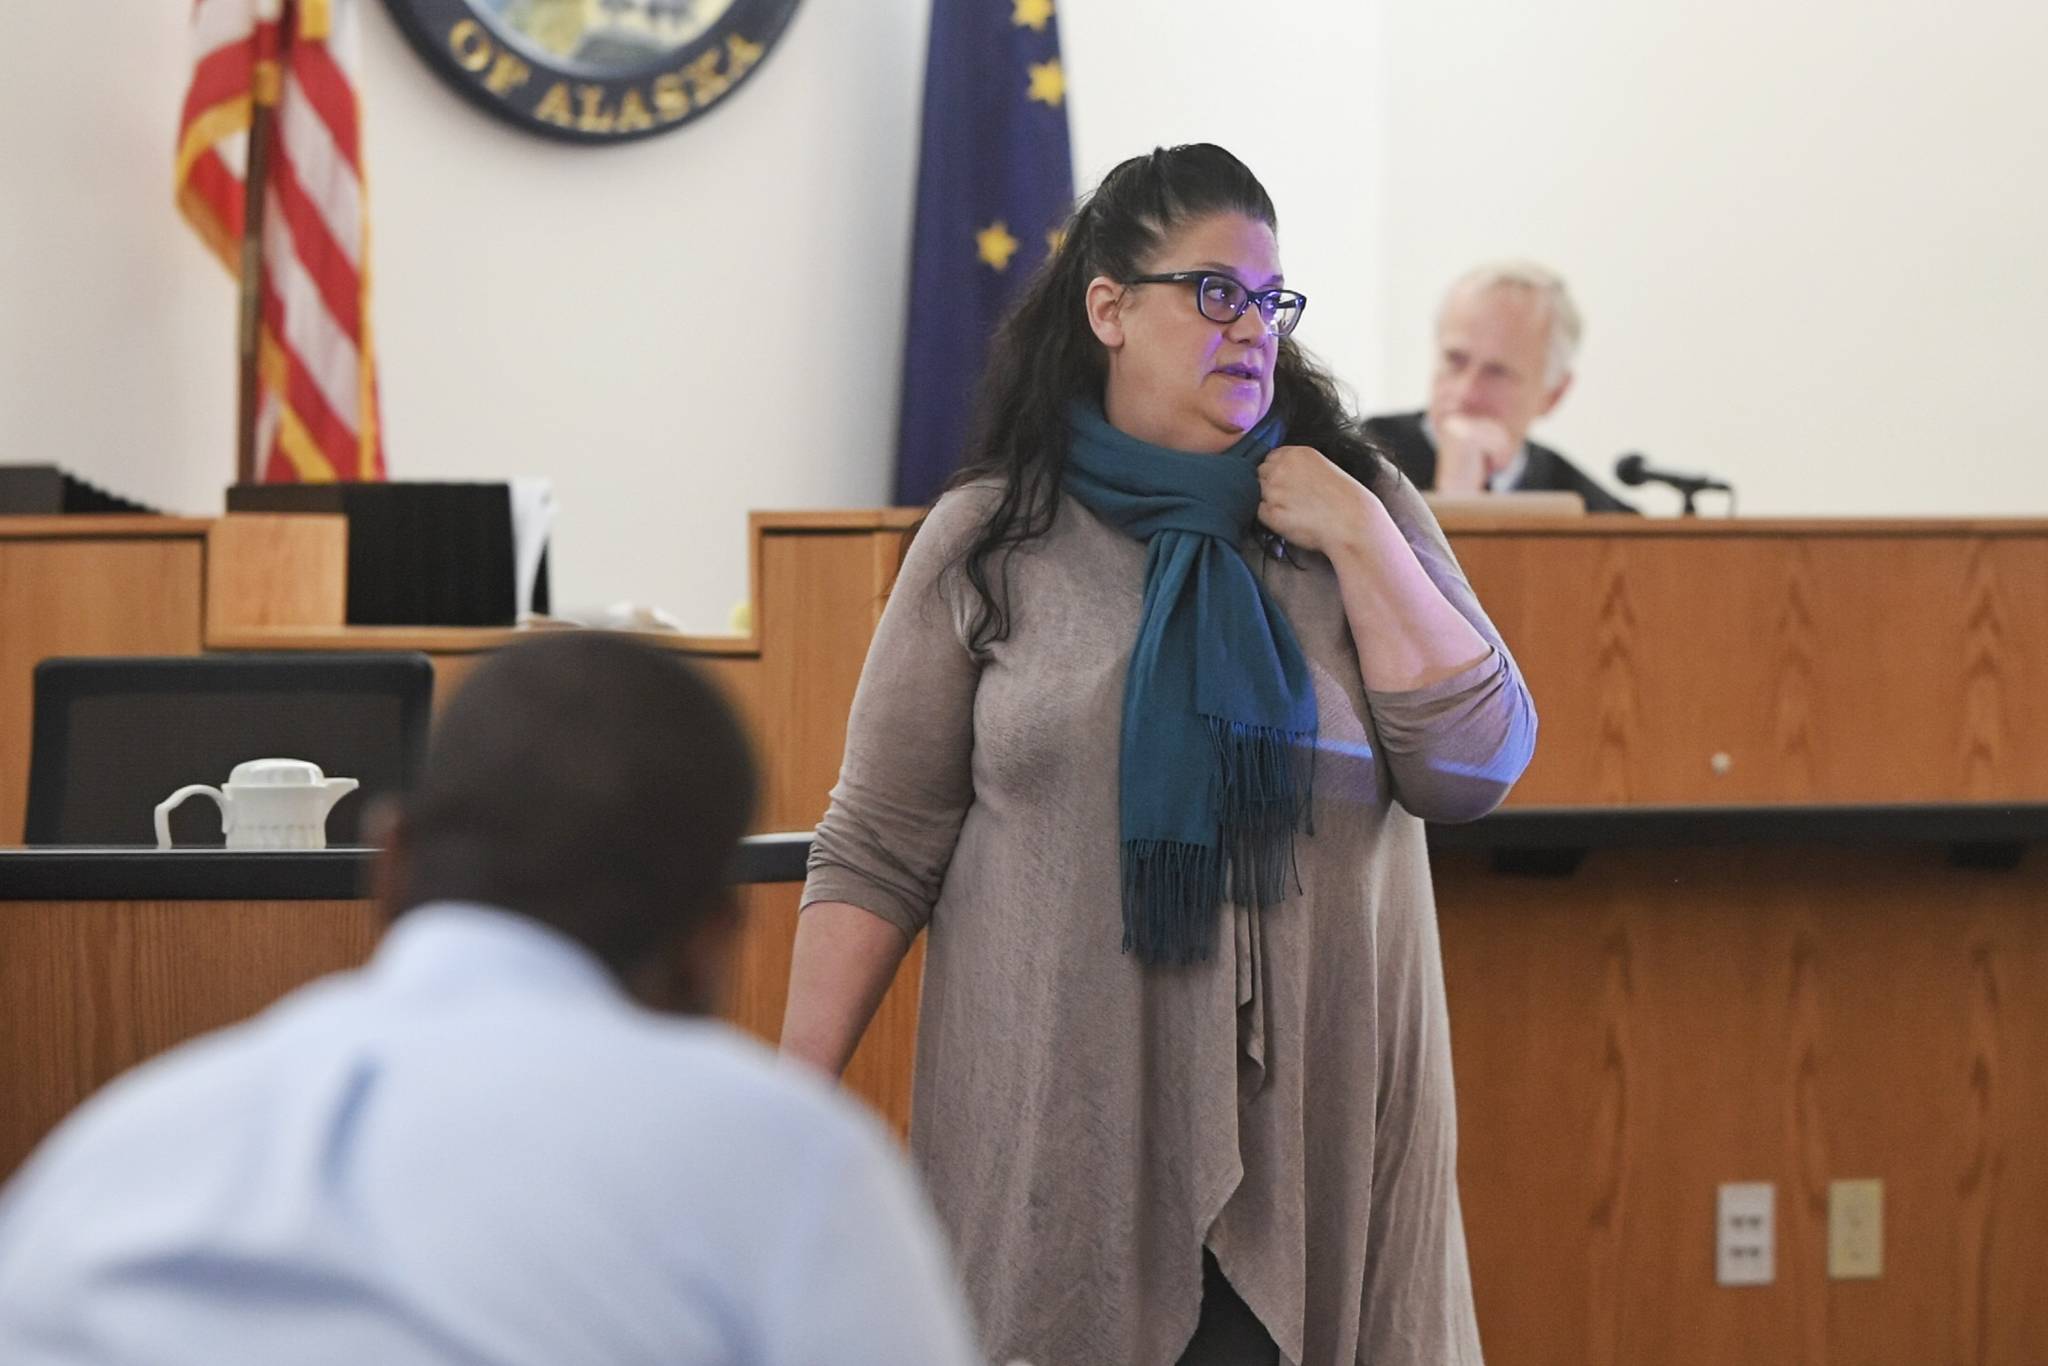 Defense Attorney Natasha Norris gives her closing argument in Juneau Superior Court on Monday, Oct. 7, 2019, during the trial of Laron Carlton Graham. Graham is facing two counts of first-degree murder for the November 2015 shooting deaths of 36-year-old Robert H. Meireis and 34-year-old Elizabeth K. Tonsmeire. Juneau Superior Court Judge Philip Pallenberg, right, and Graham, left, listen. (Michael Penn | Juneau Empire)